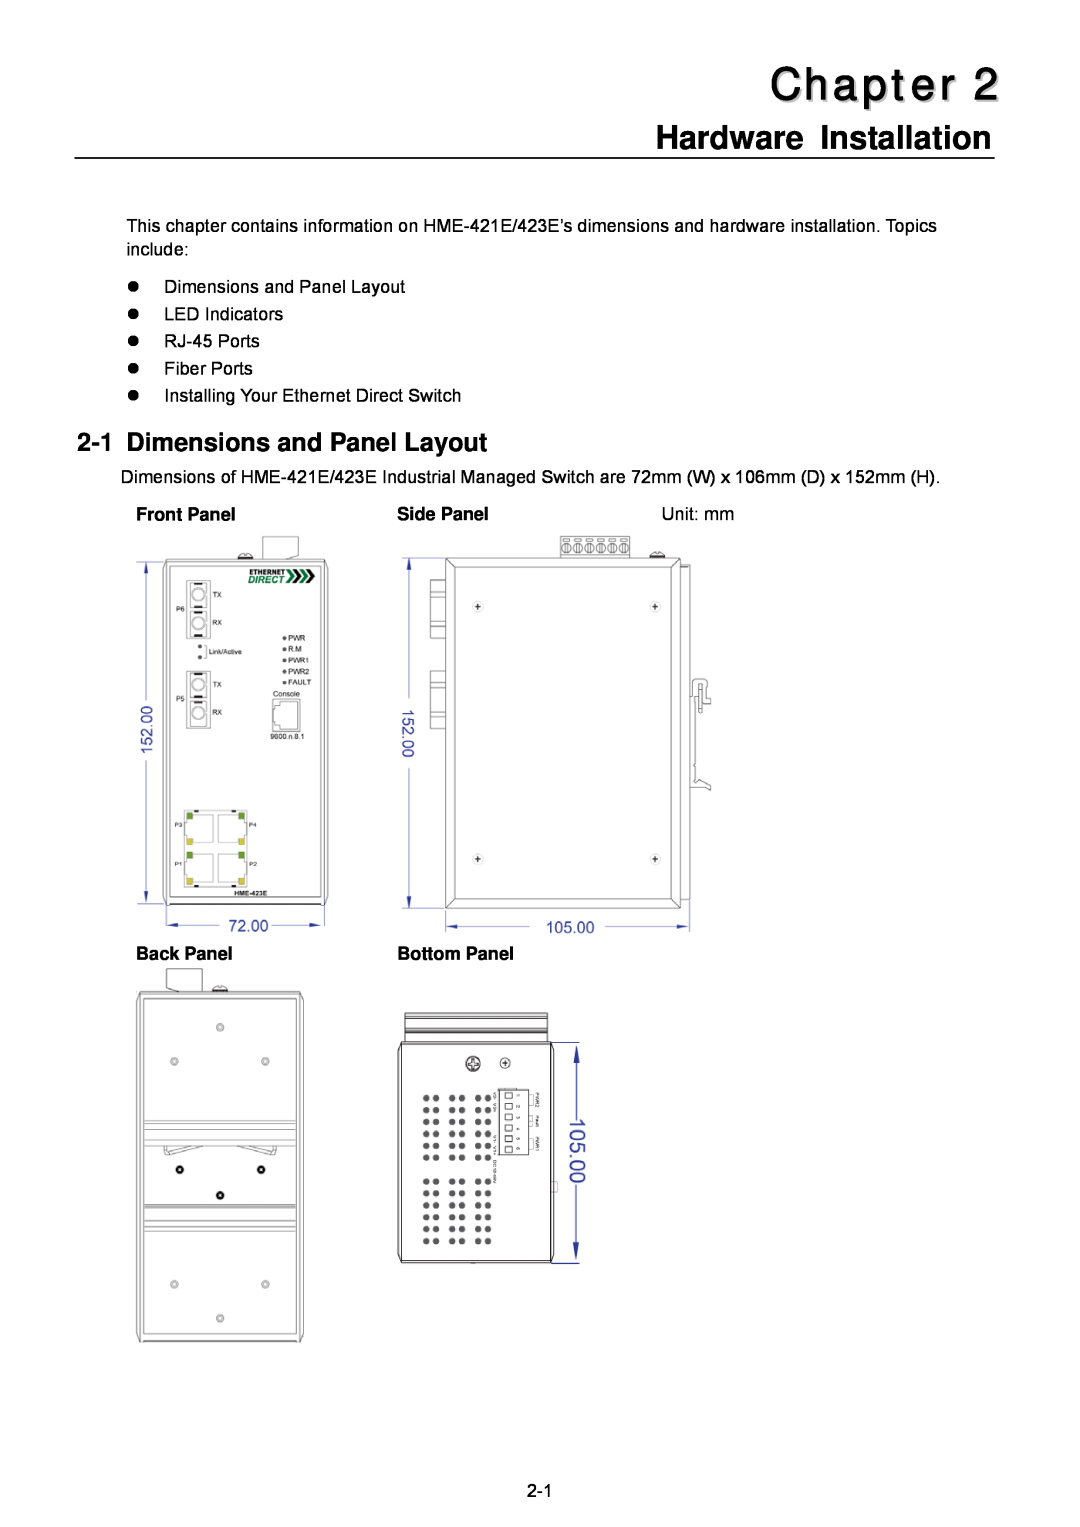 Husky HME-421E, HME-423E user manual Hardware Installation, Dimensions and Panel Layout, Chapter 